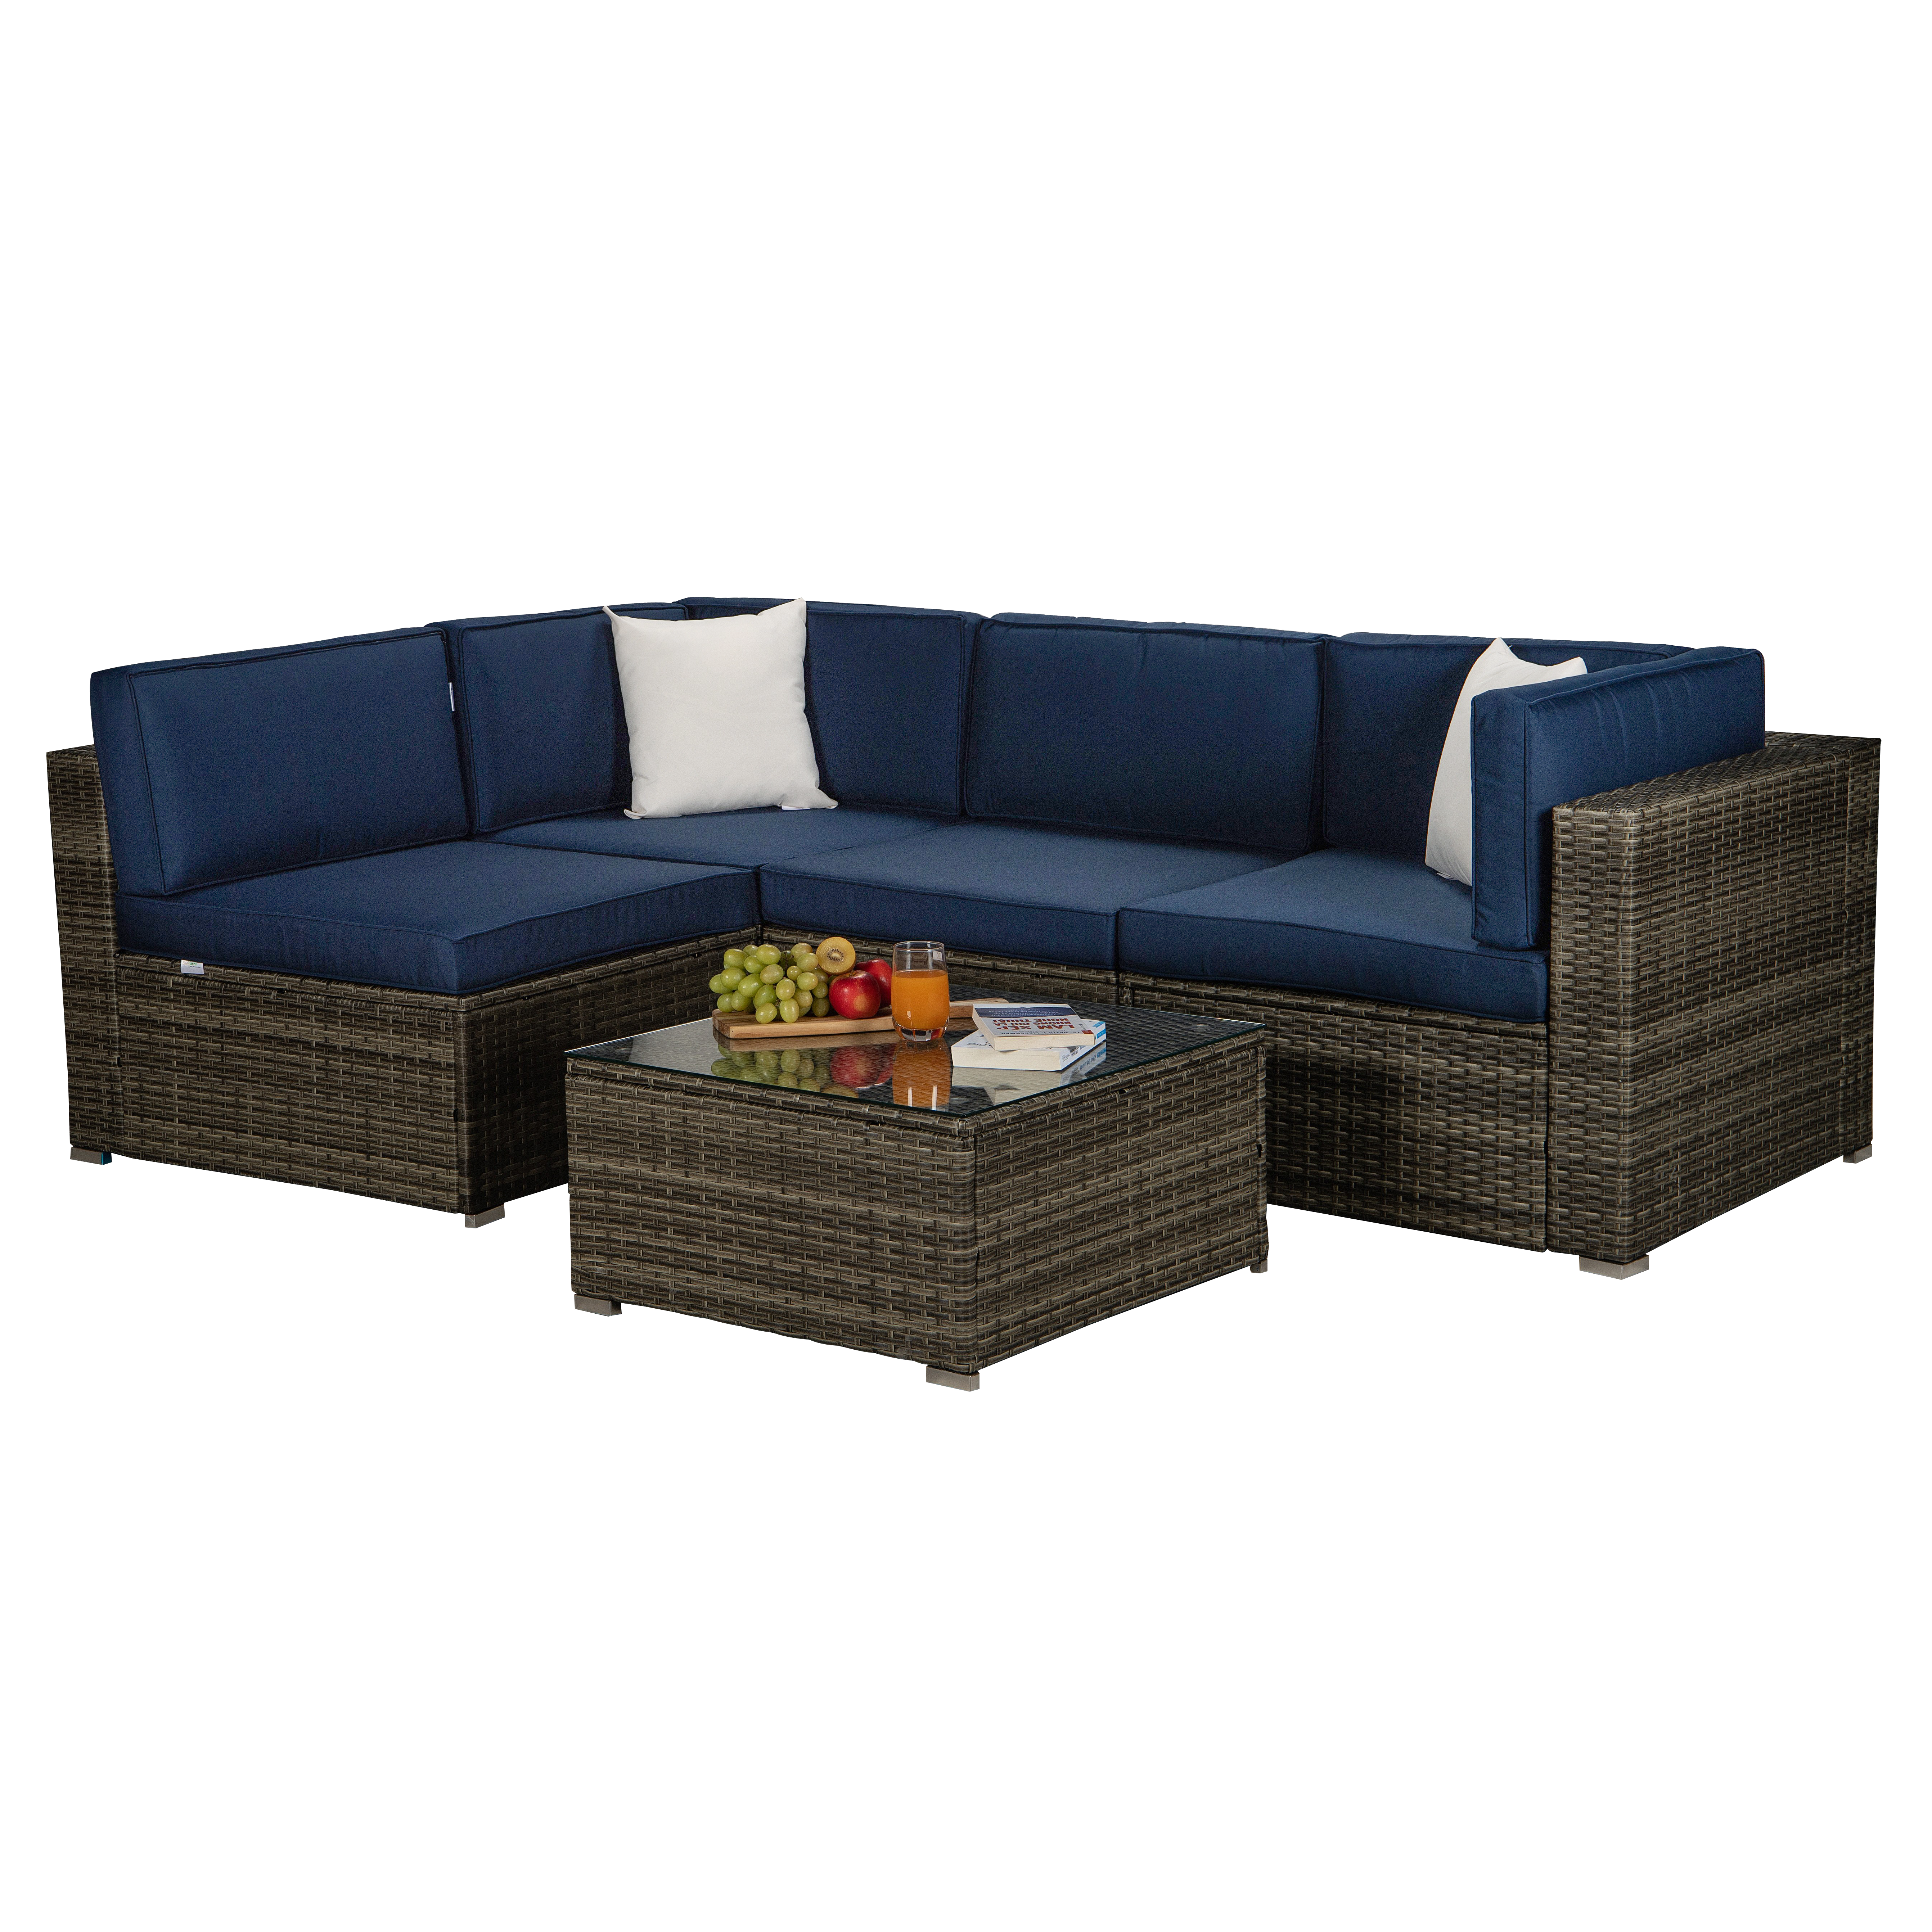 Beefurni Outdoor Garden Patio Furniture 5-Piece Gray PE Rattan Wicker Sectional Navy Cushioned Sofa Sets with 2 Beige Pillows-Boyel Living